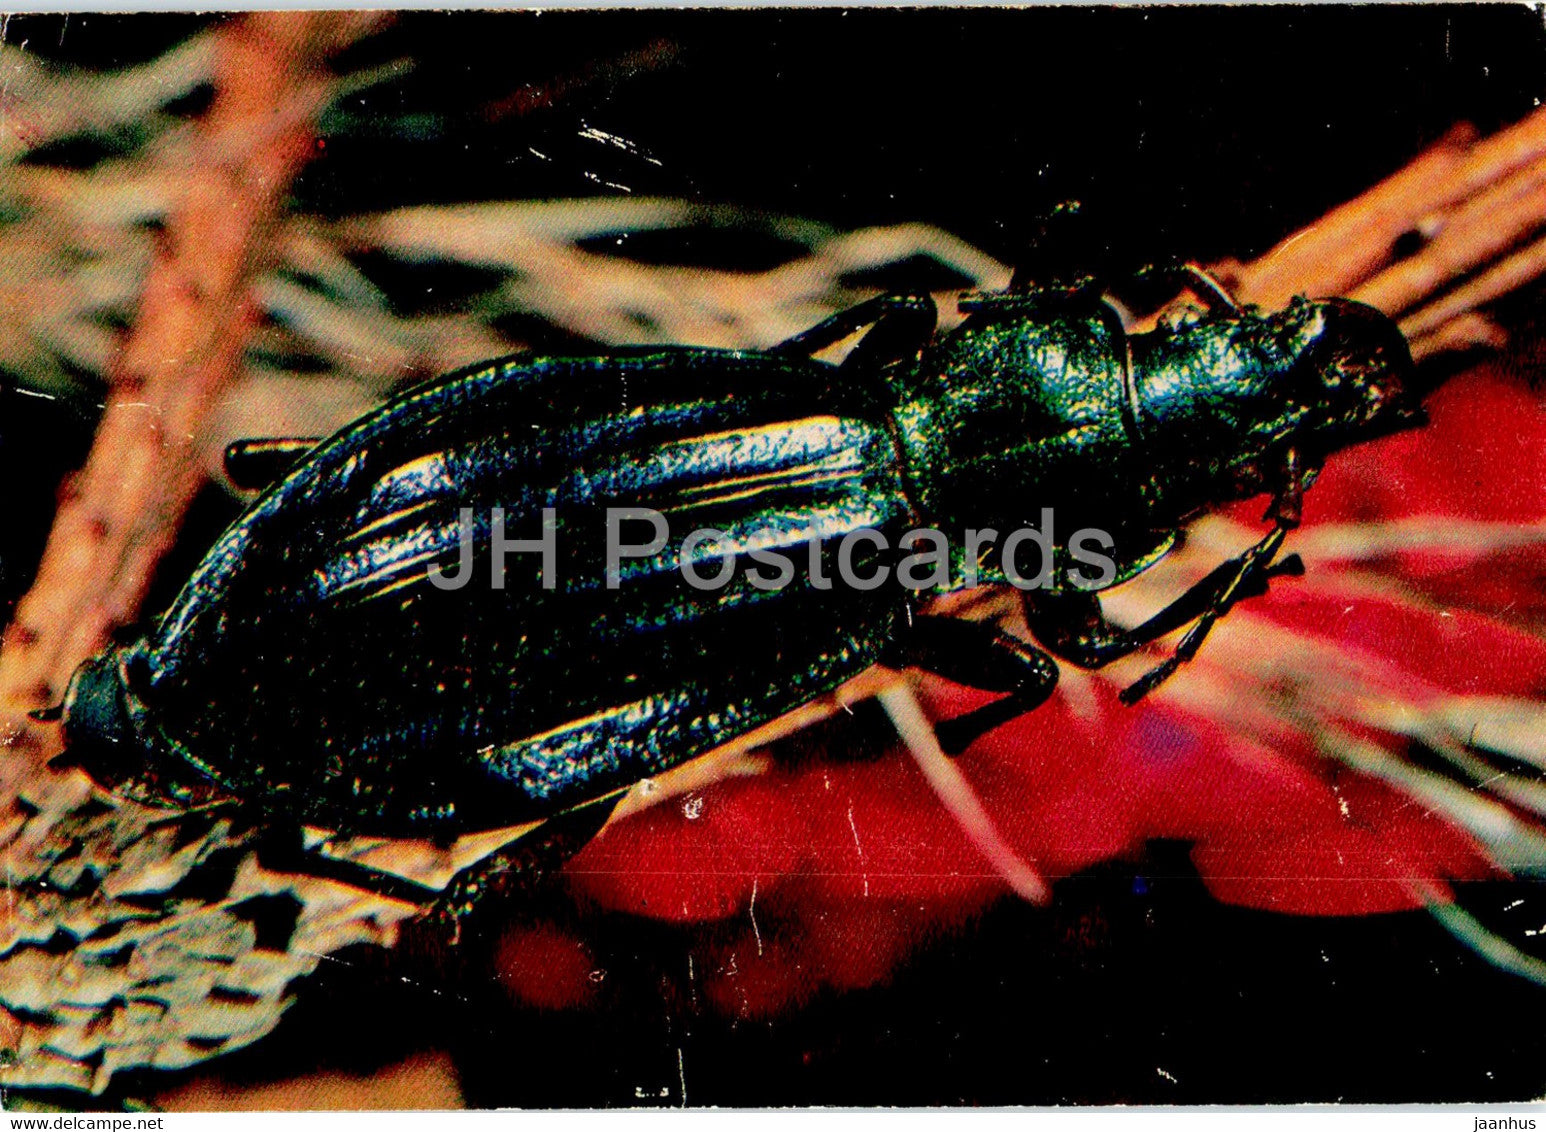 Carabus auronitens - insects - 1977 - Russia USSR - unused - JH Postcards